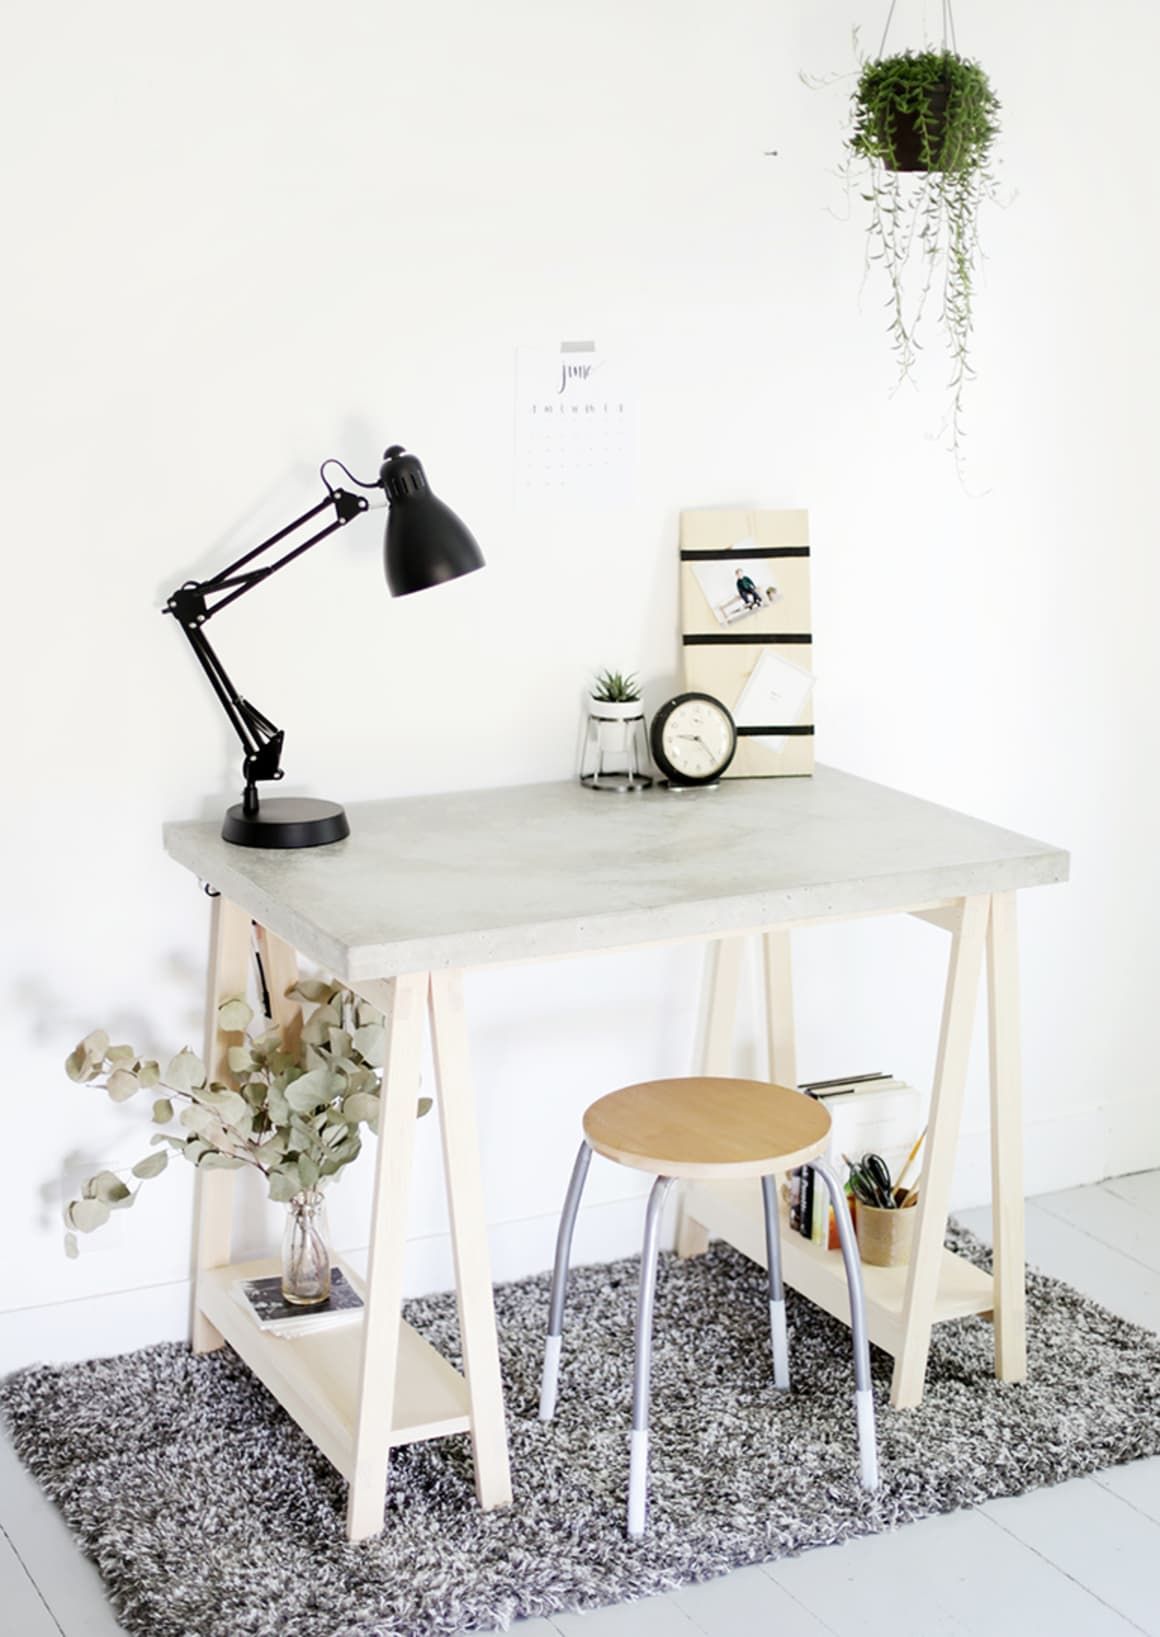 DIY Desk Ideas to Make Working from Home a Breeze - DIY Desk Ideas to Make Working from Home a Breeze -   19 diy Desk easy ideas